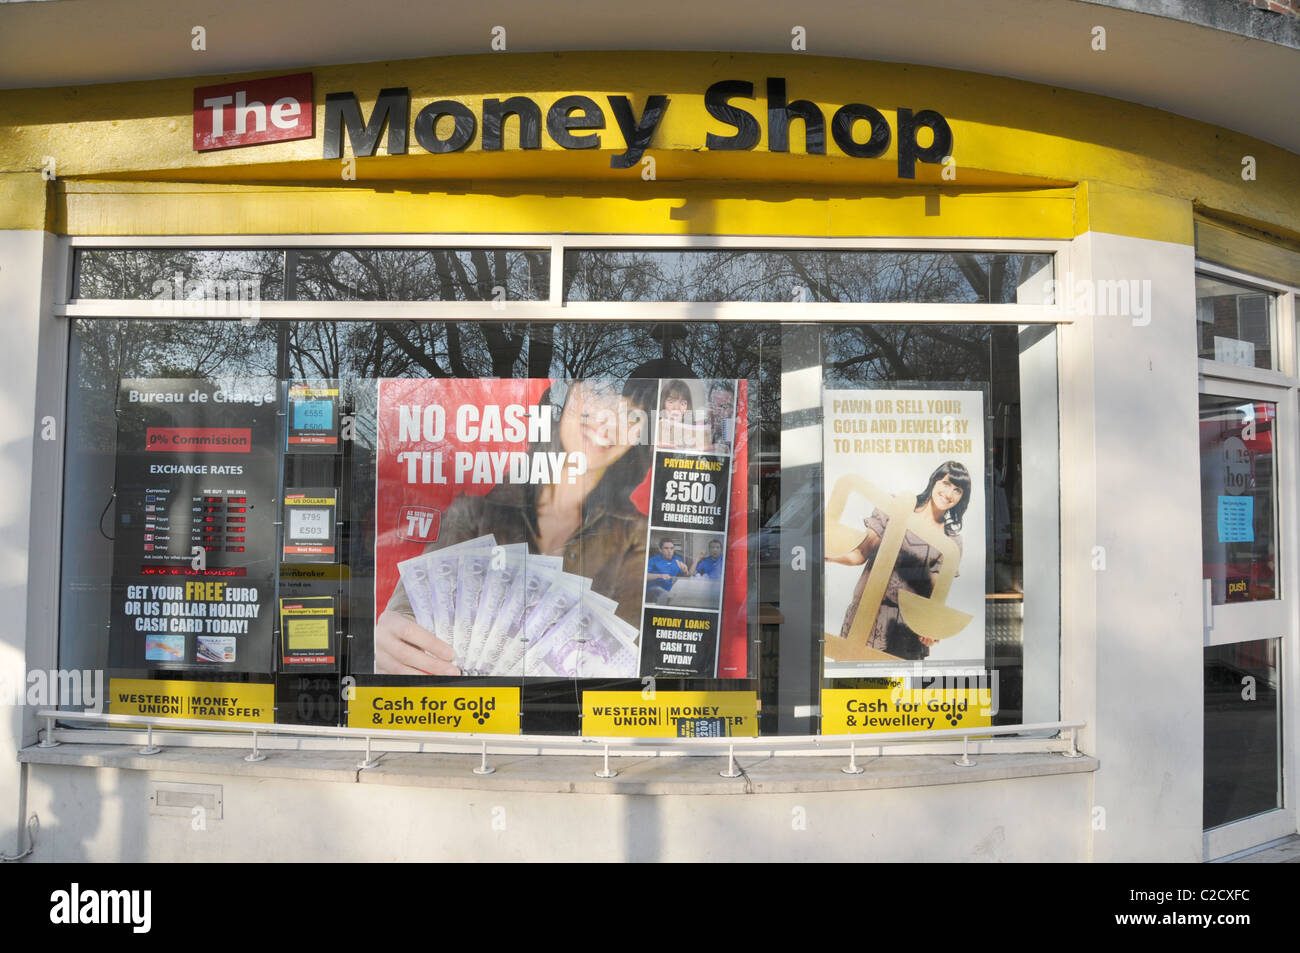 The Money Shop High Street Money lenders payday loans cheques cashed debt loan shark high interest rates debts Stock Photo